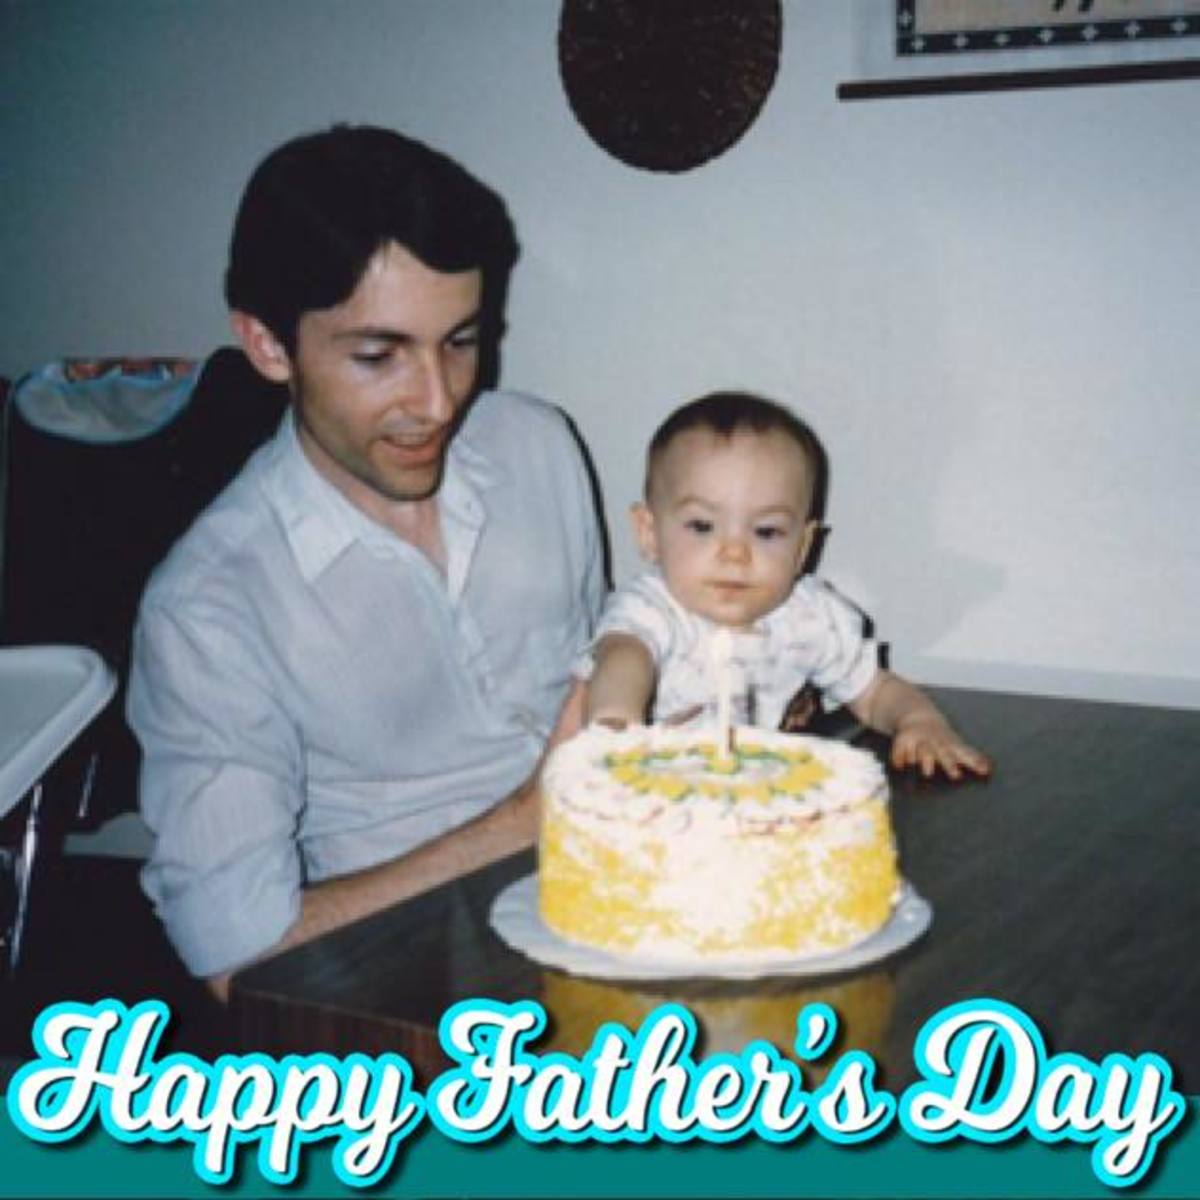 Photo of me and my dad, 1986 (my first birthday)